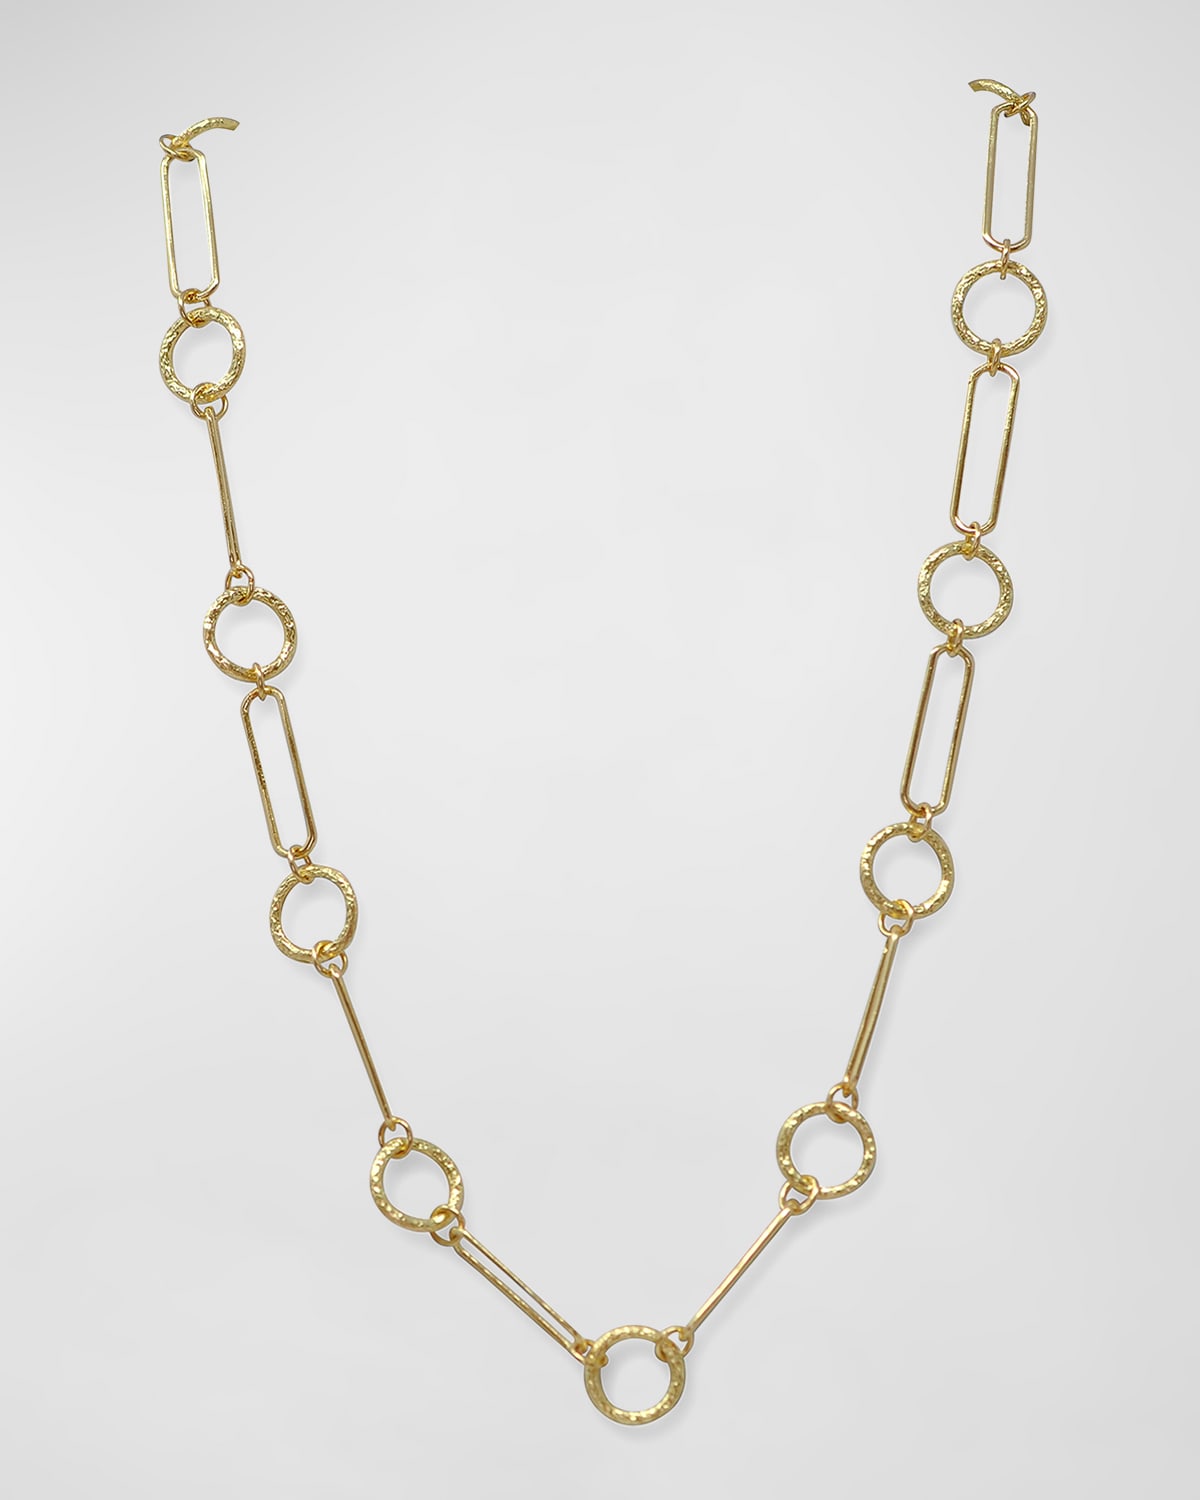 18K Yellow Gold Paper Clip Necklace, 18.5"L